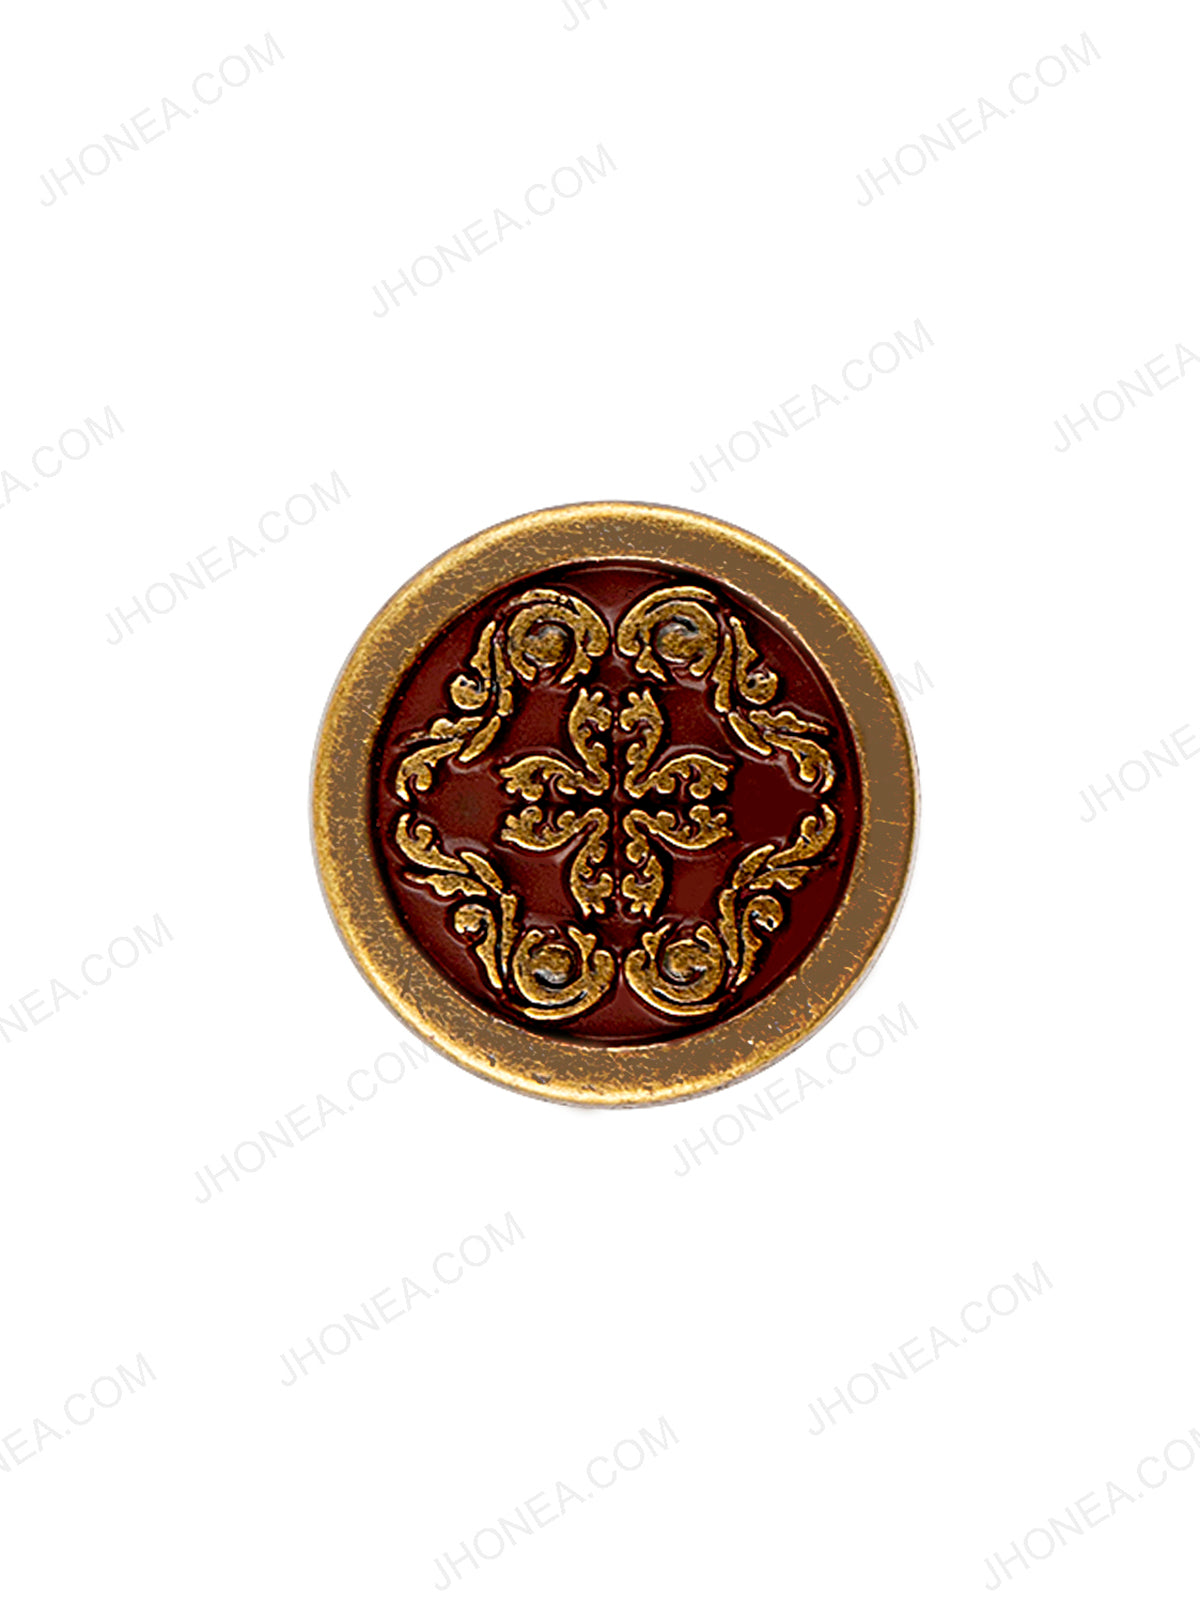 Regal Design Antique Brass with Red Color Coat Button